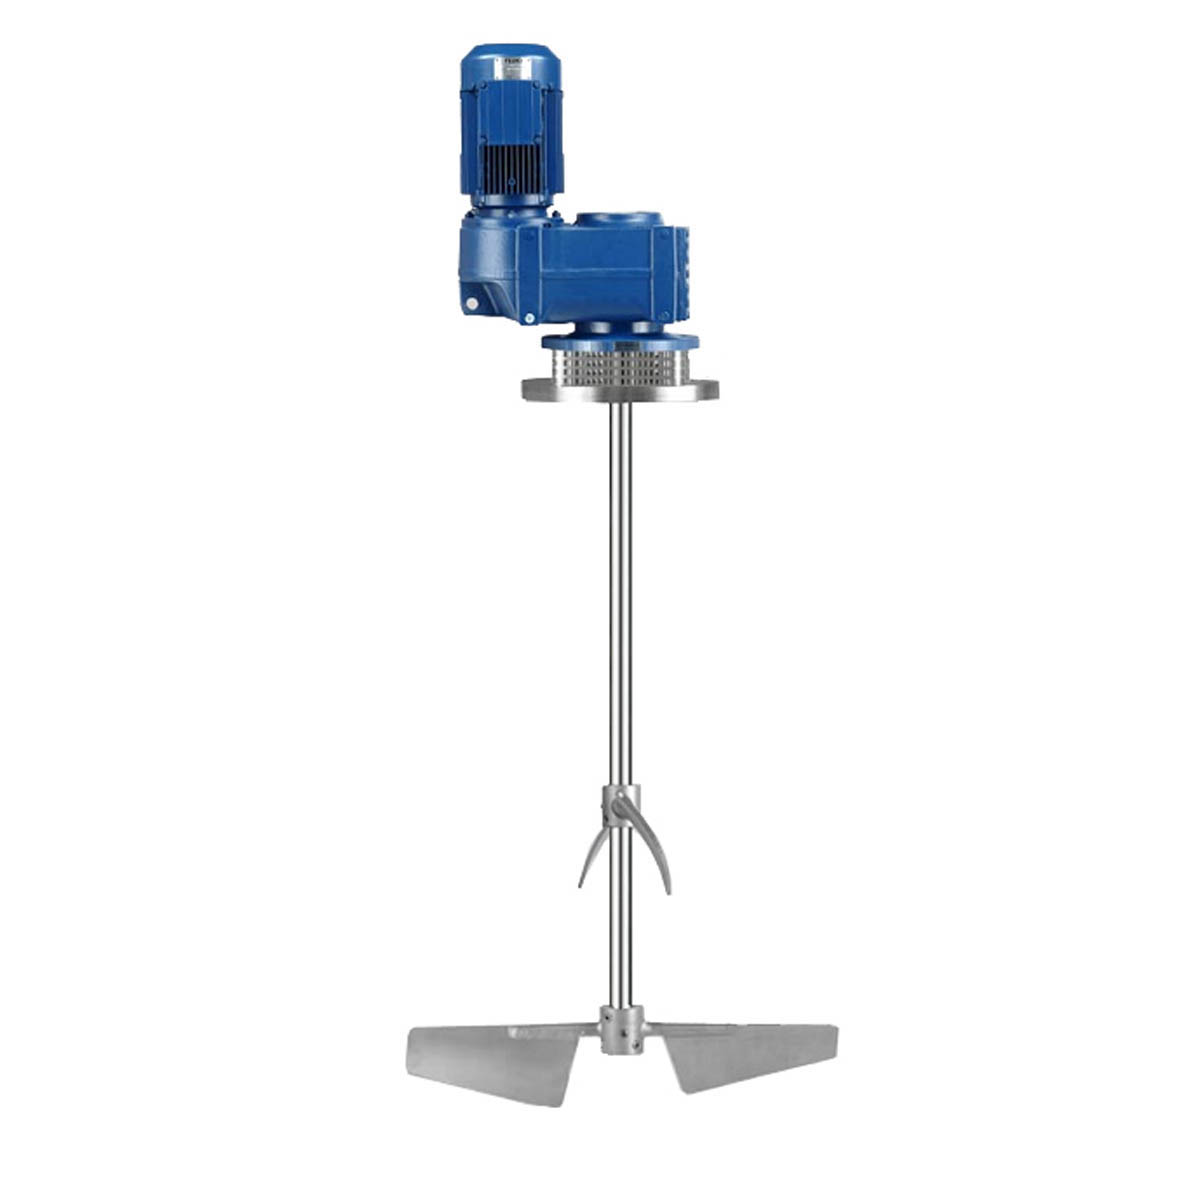 Electric Gear Drive Flange Mount Mixer and Agitator